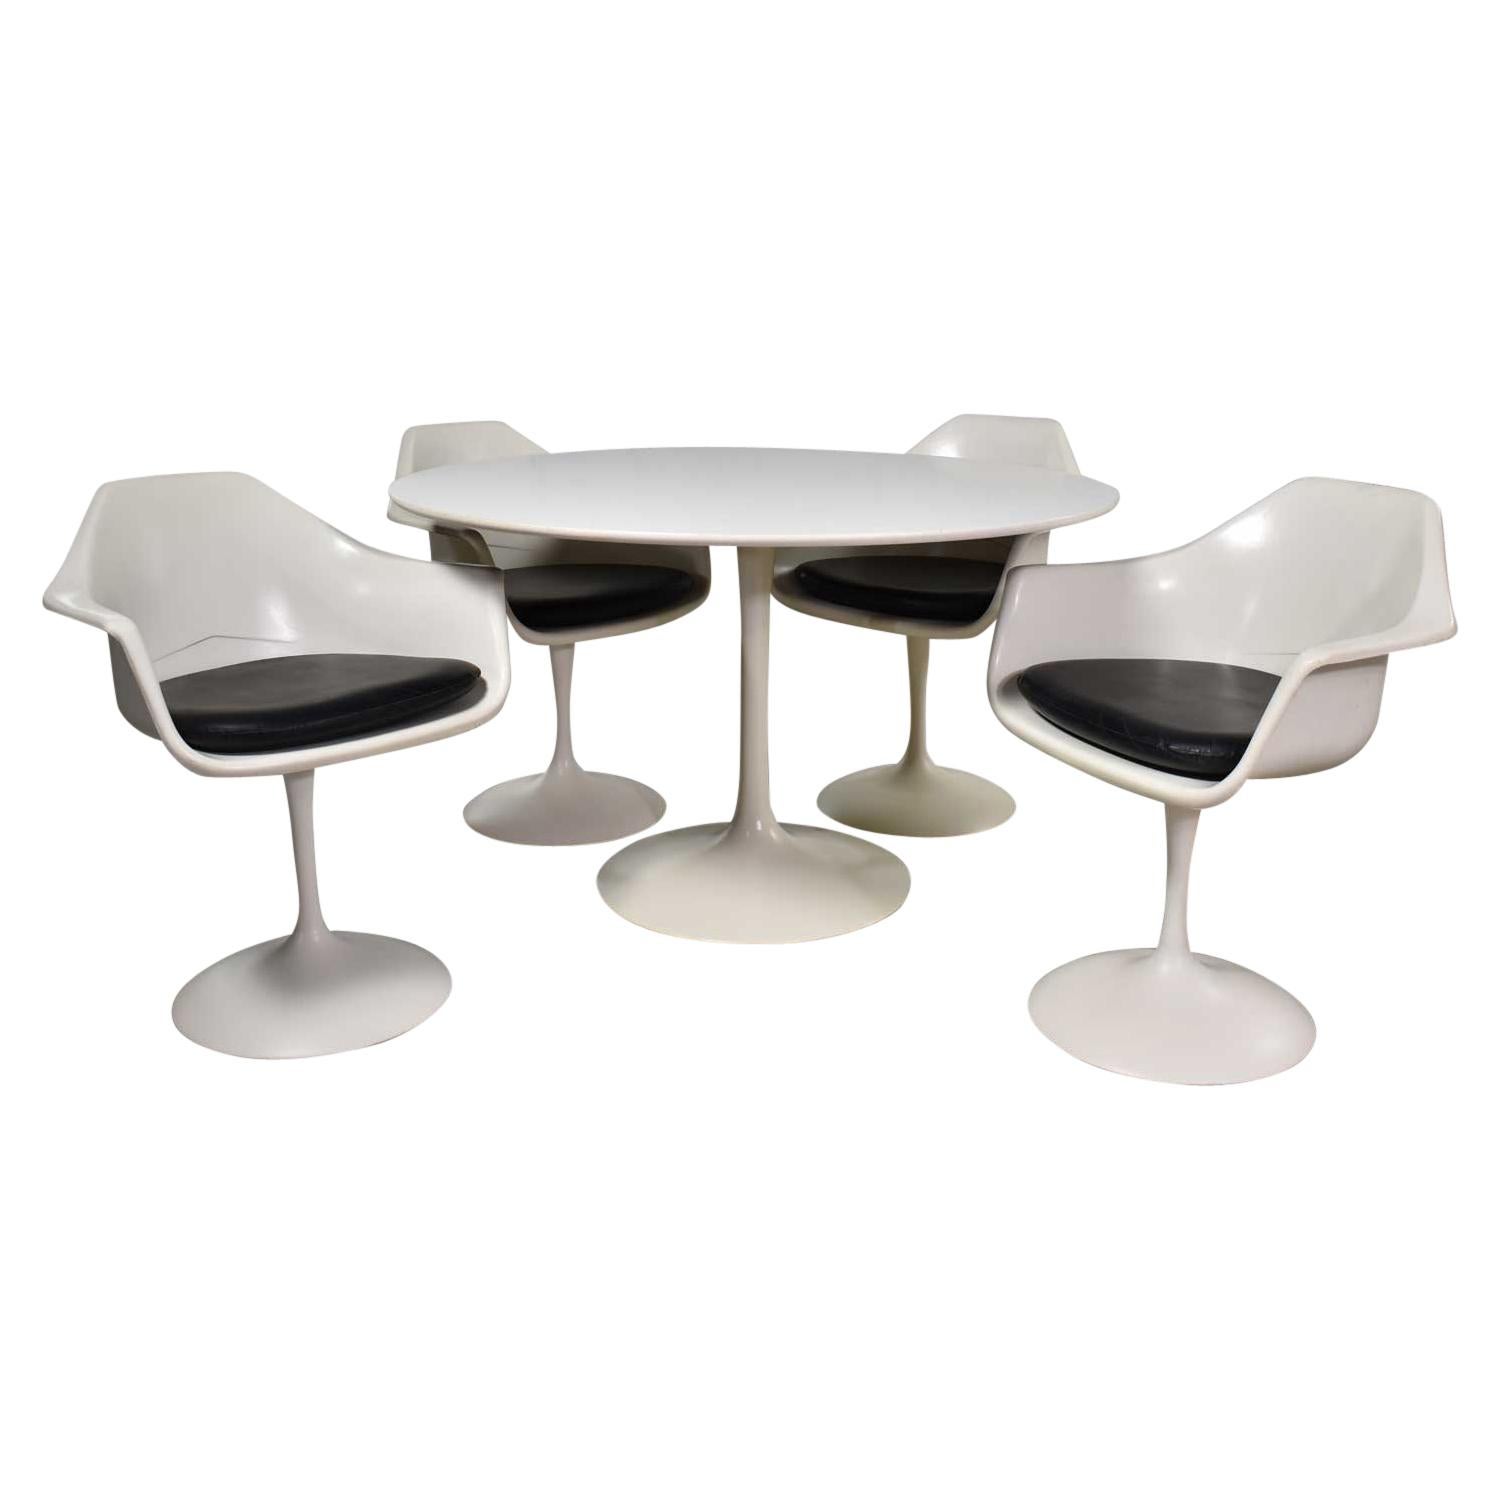 Tulip Style White Fiberglass Swivel Chairs and Table by Umanoff for Contemporary